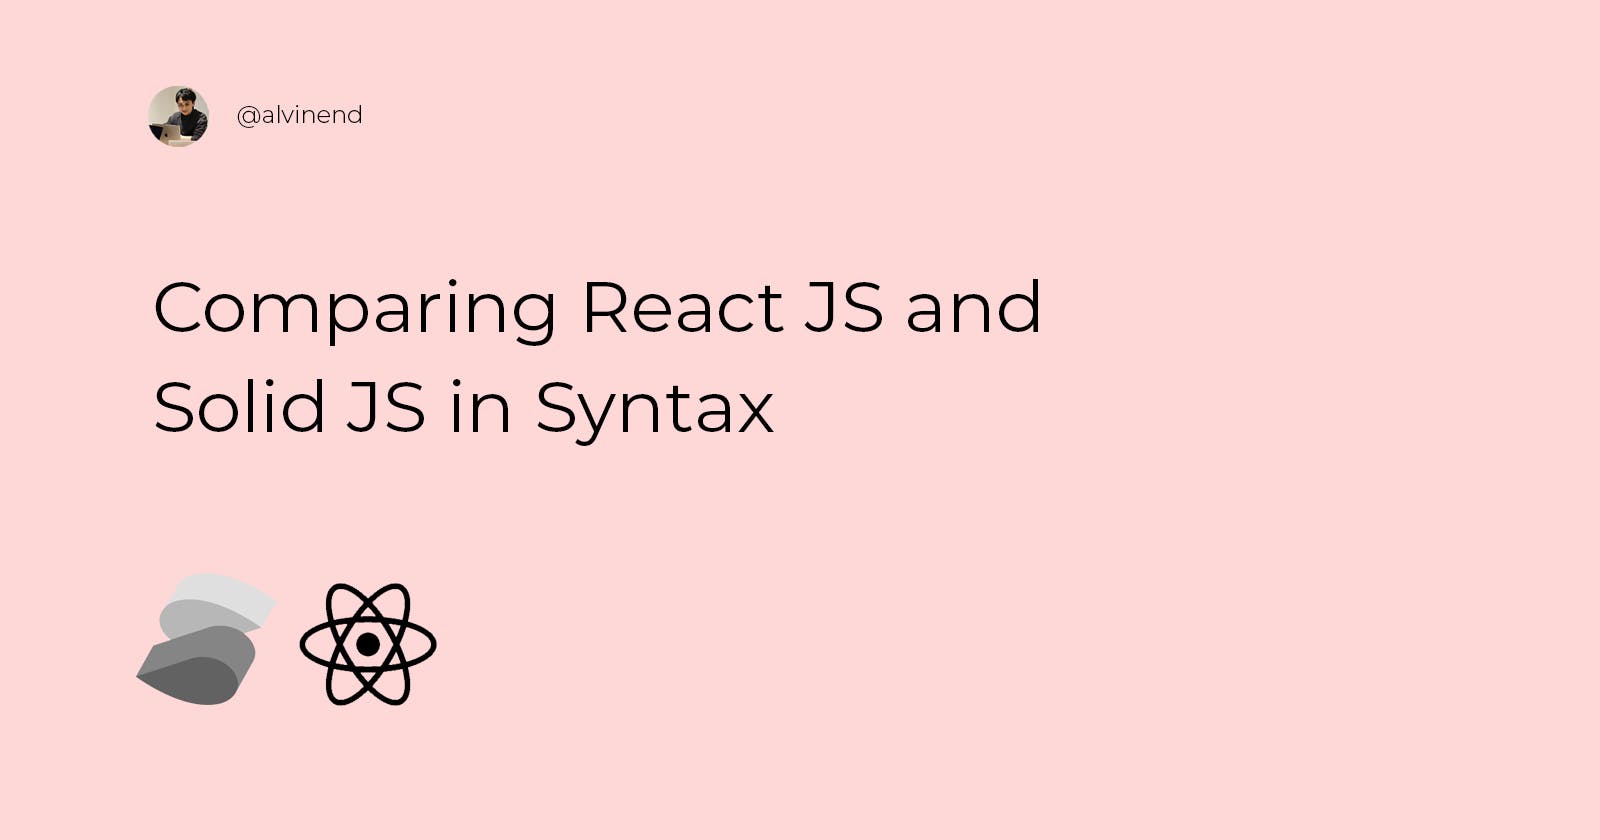 Comparing React JS and Solid JS in Syntax